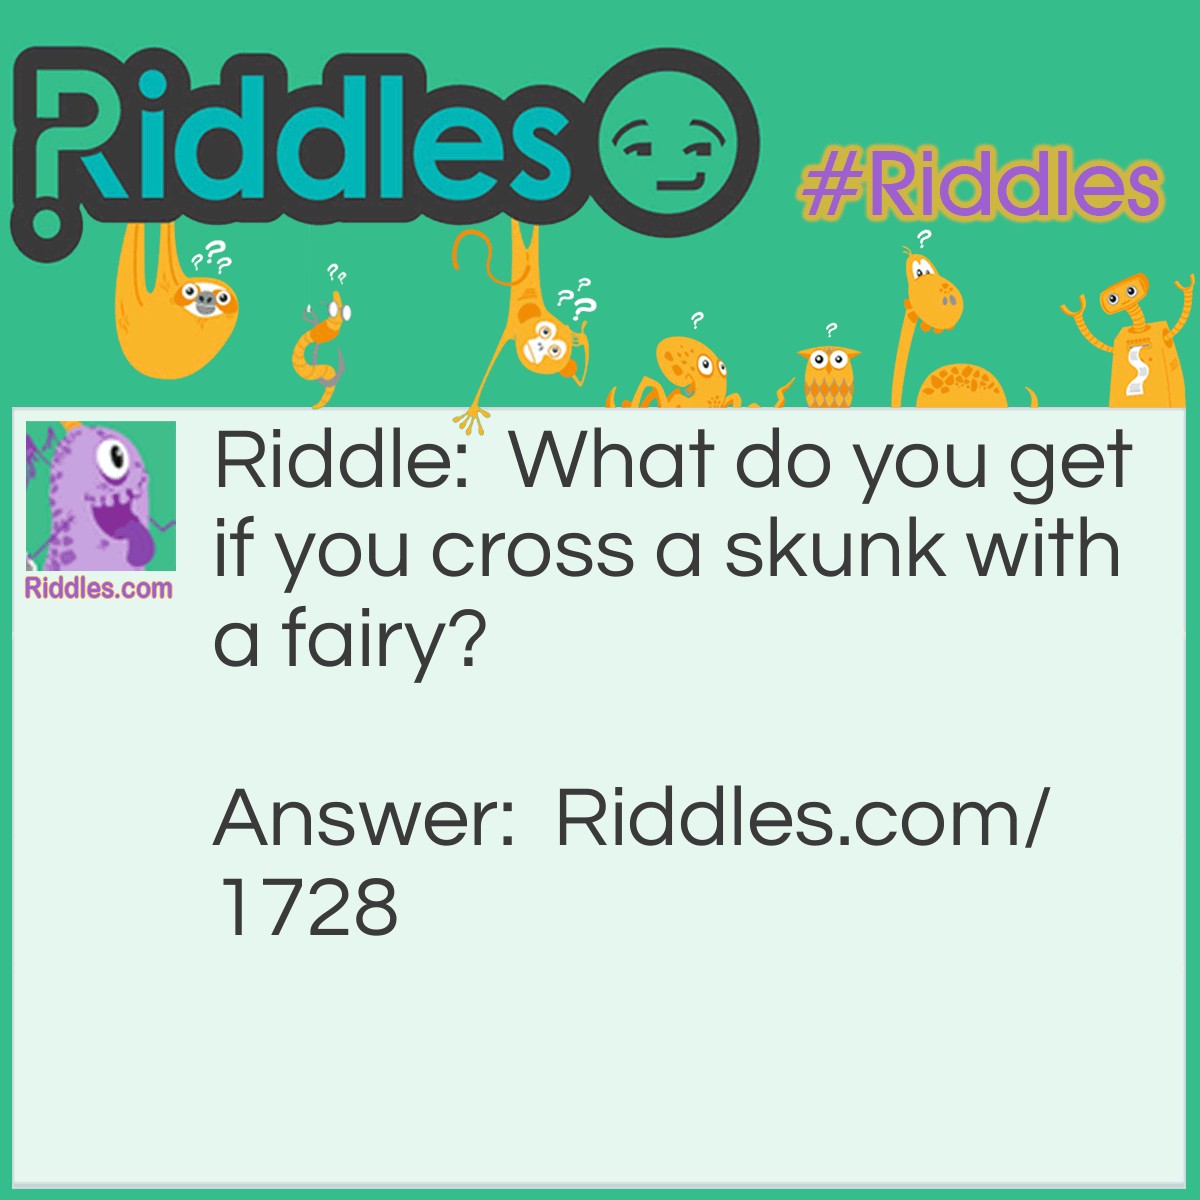 Riddle: What do you get if you cross a skunk with a fairy? Answer: Stinkerbell!